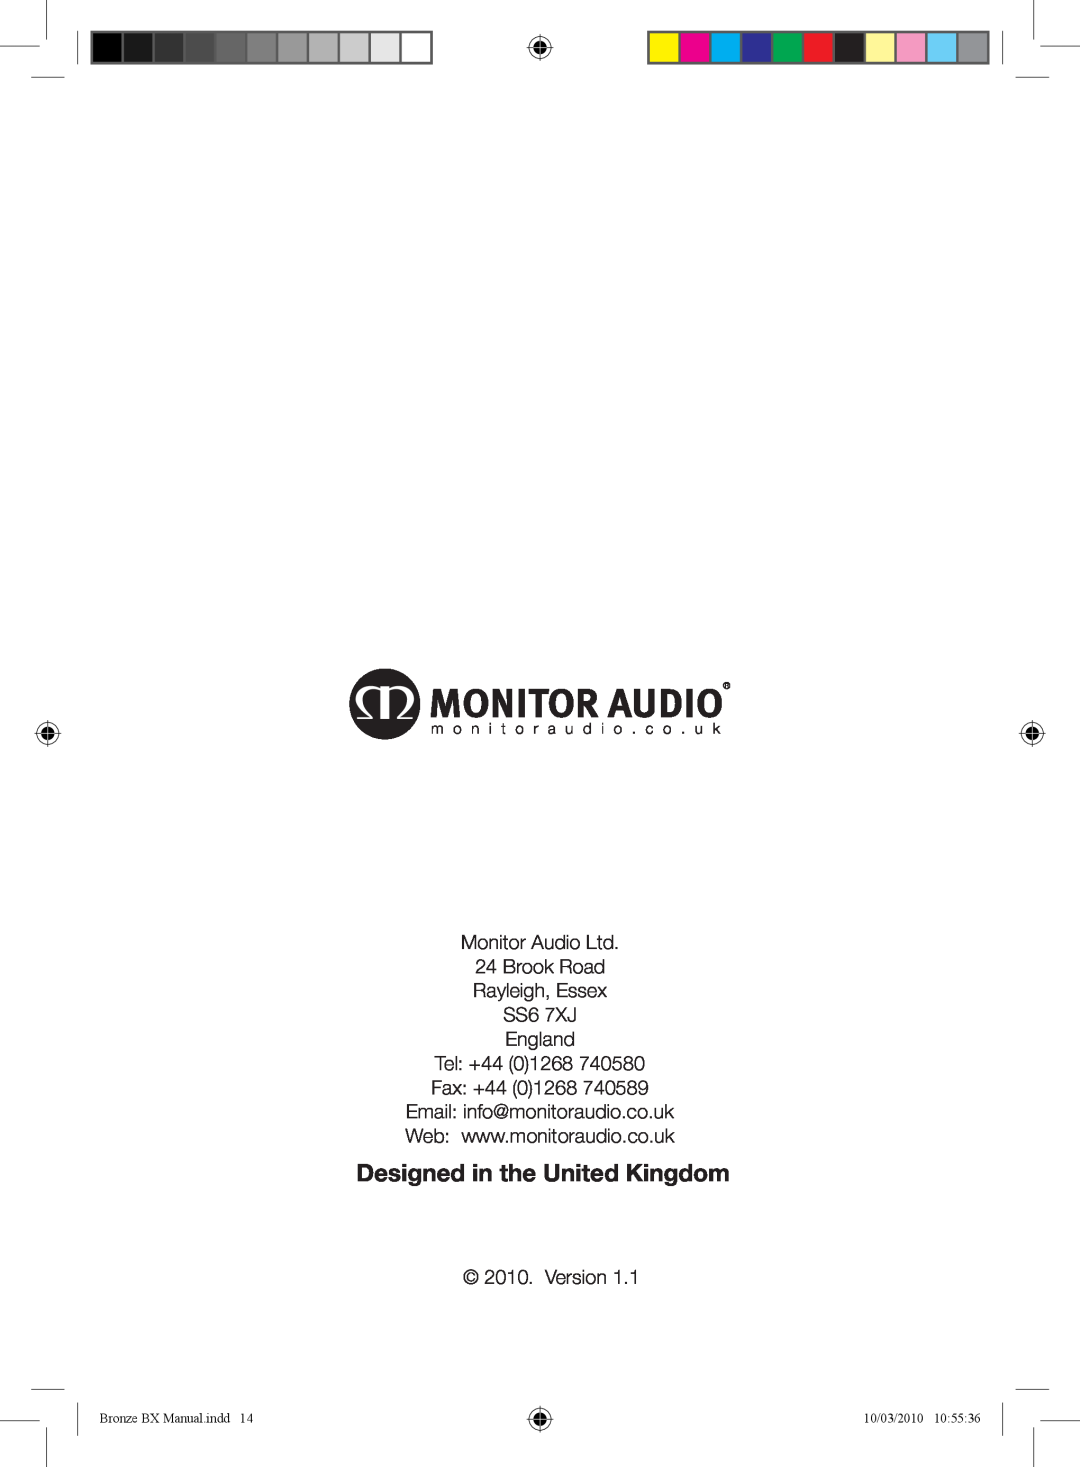 Monitor Audio BX Series Designed in the United Kingdom, SS6 7XJ England Tel +44 01268 Fax +44, Version, 10/03/2010 